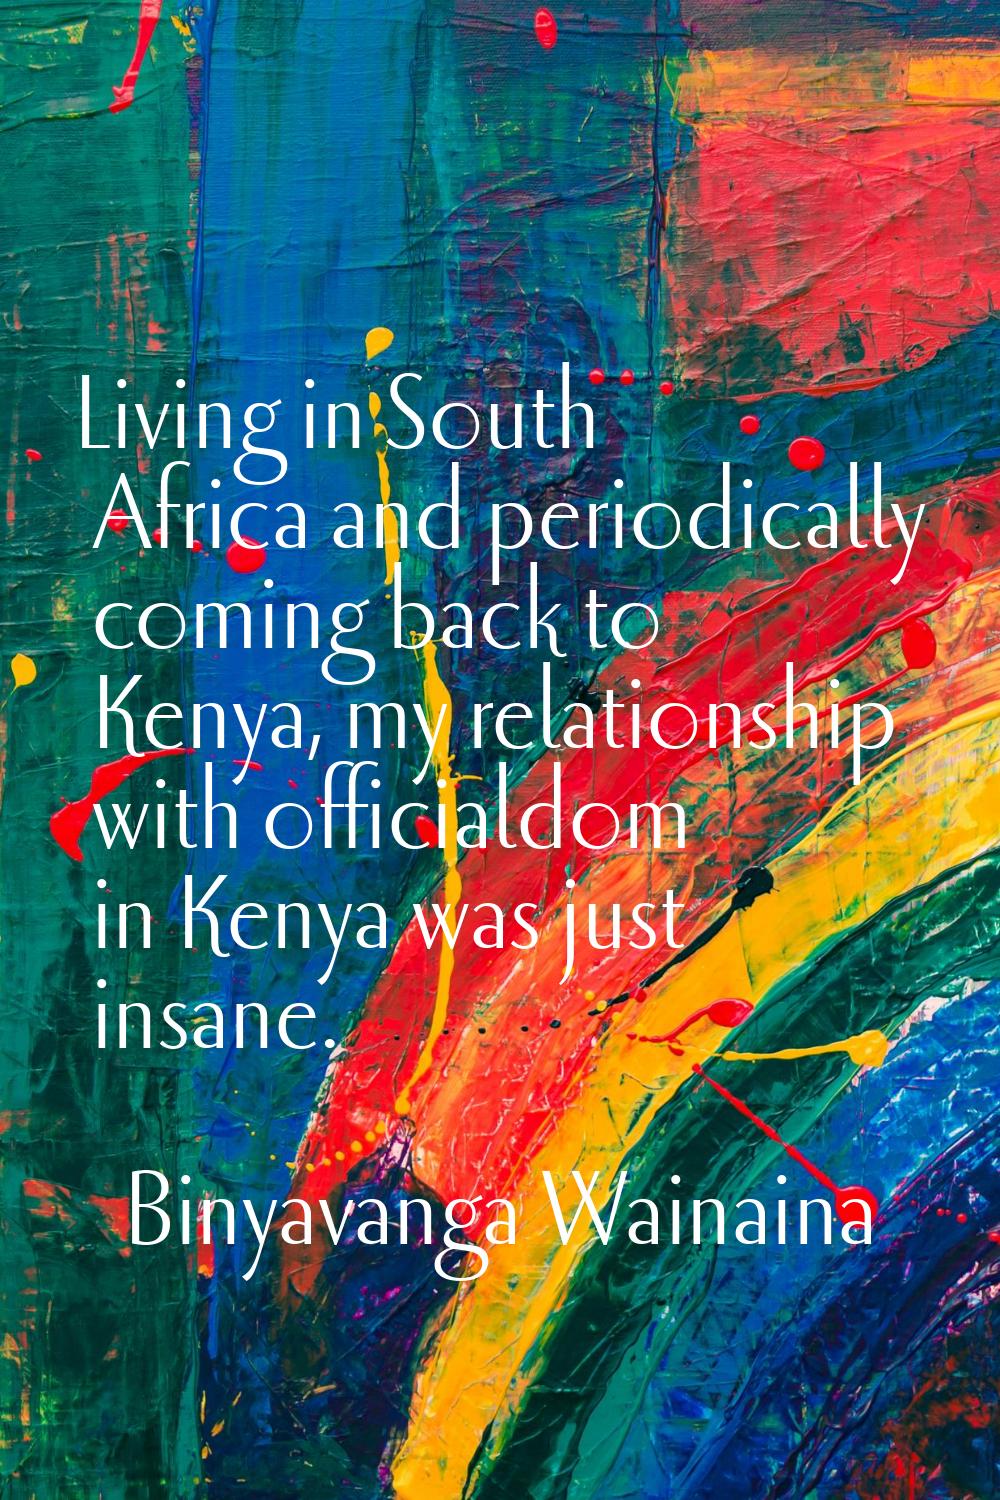 Living in South Africa and periodically coming back to Kenya, my relationship with officialdom in K